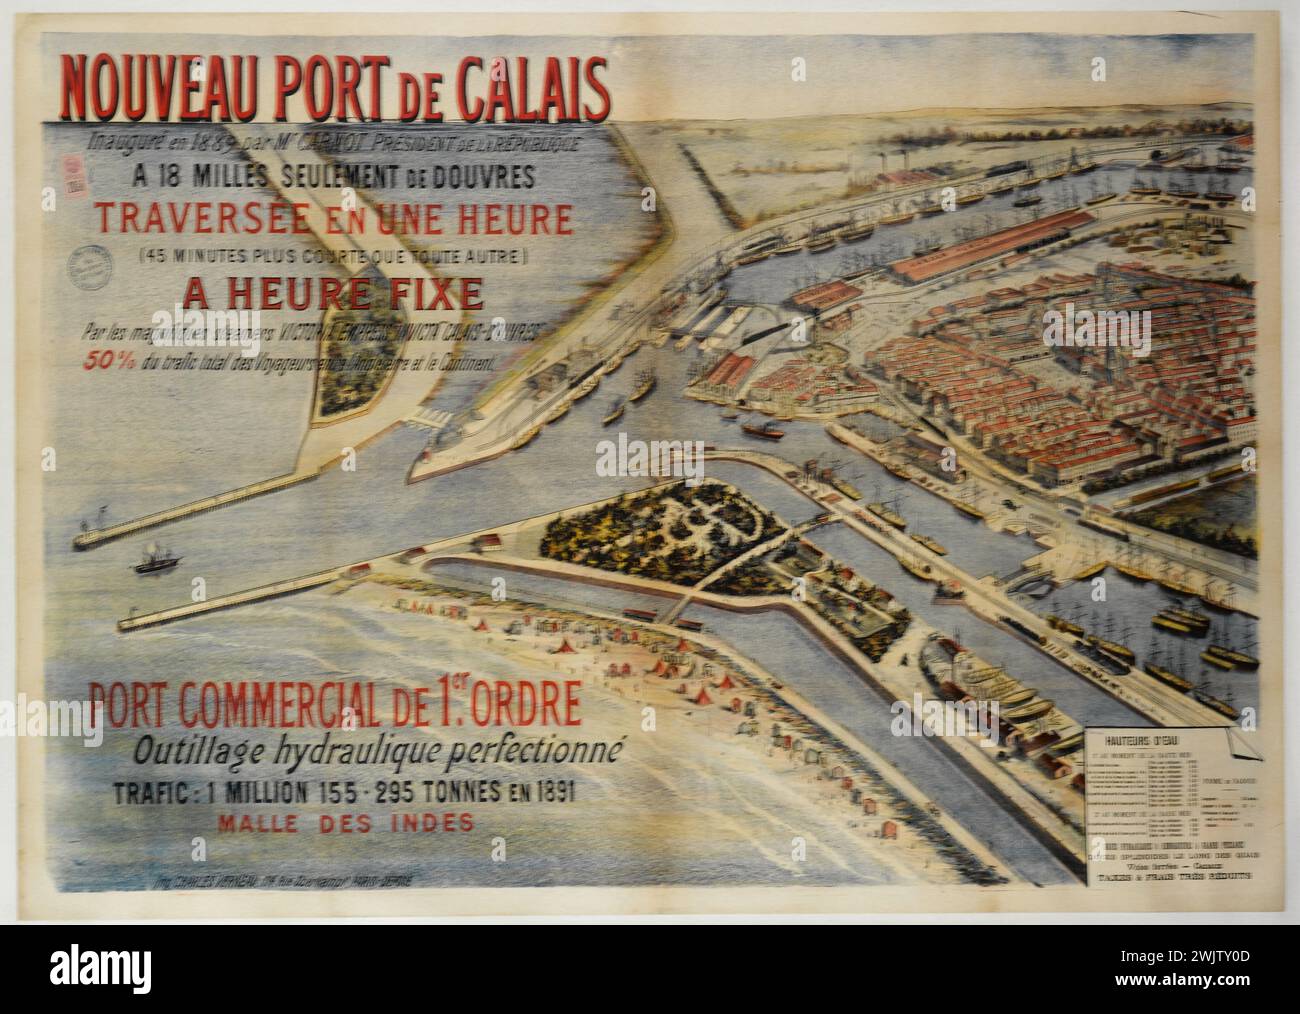 Charles Verneau printing house. 'New port of Calais'. Poster. Color lithography. Around 1891. Paris, Carnavalet museum. Poster, lithography, sea, advertising, port, reclass, crossing, aerian view Stock Photo